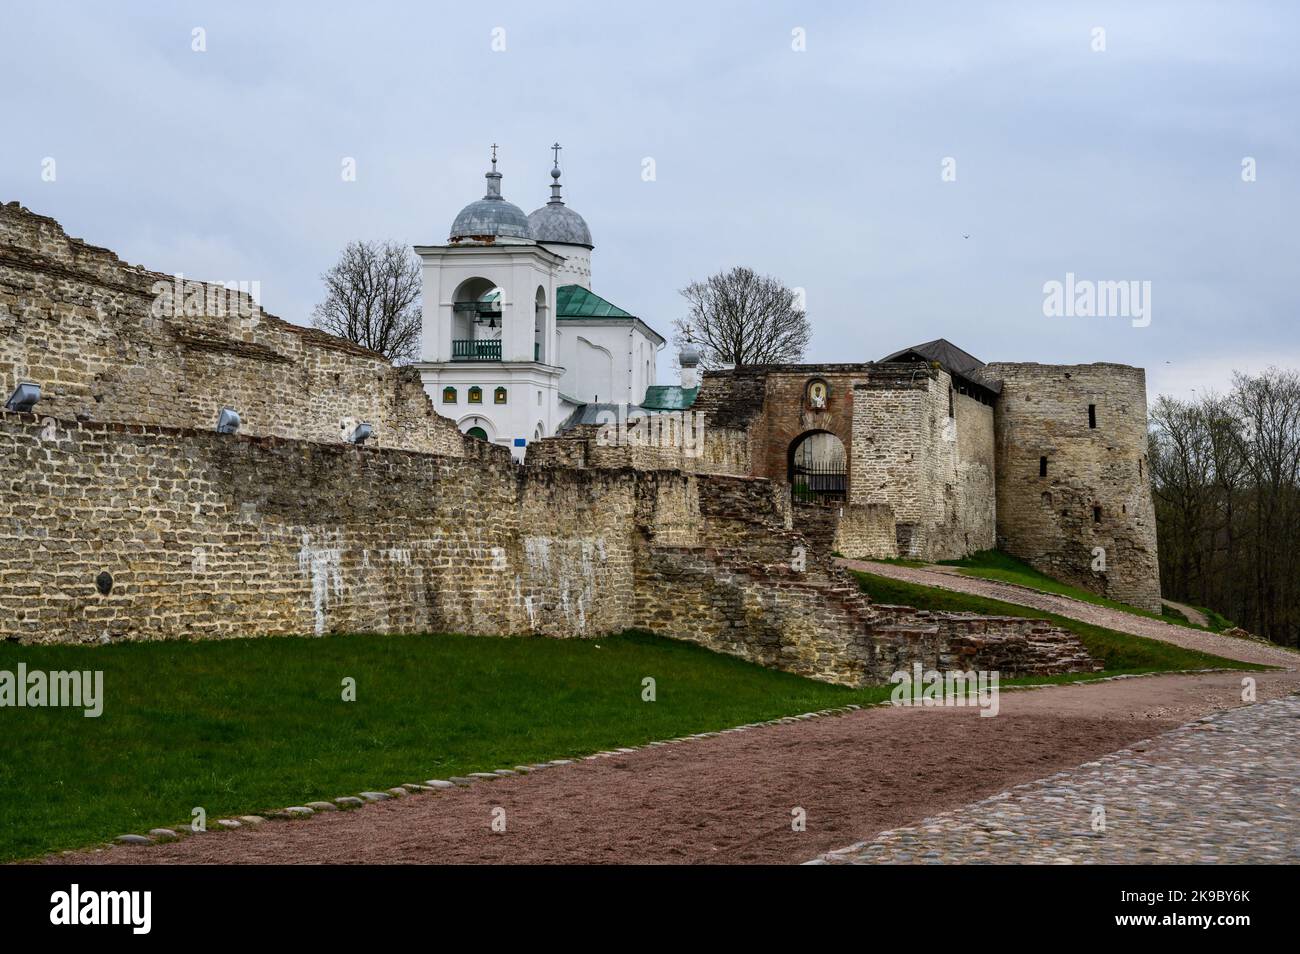 Izborsk fortress. Izborsk Pskov Oblast. Historical places of Russia. The old ruined fortress. Stock Photo